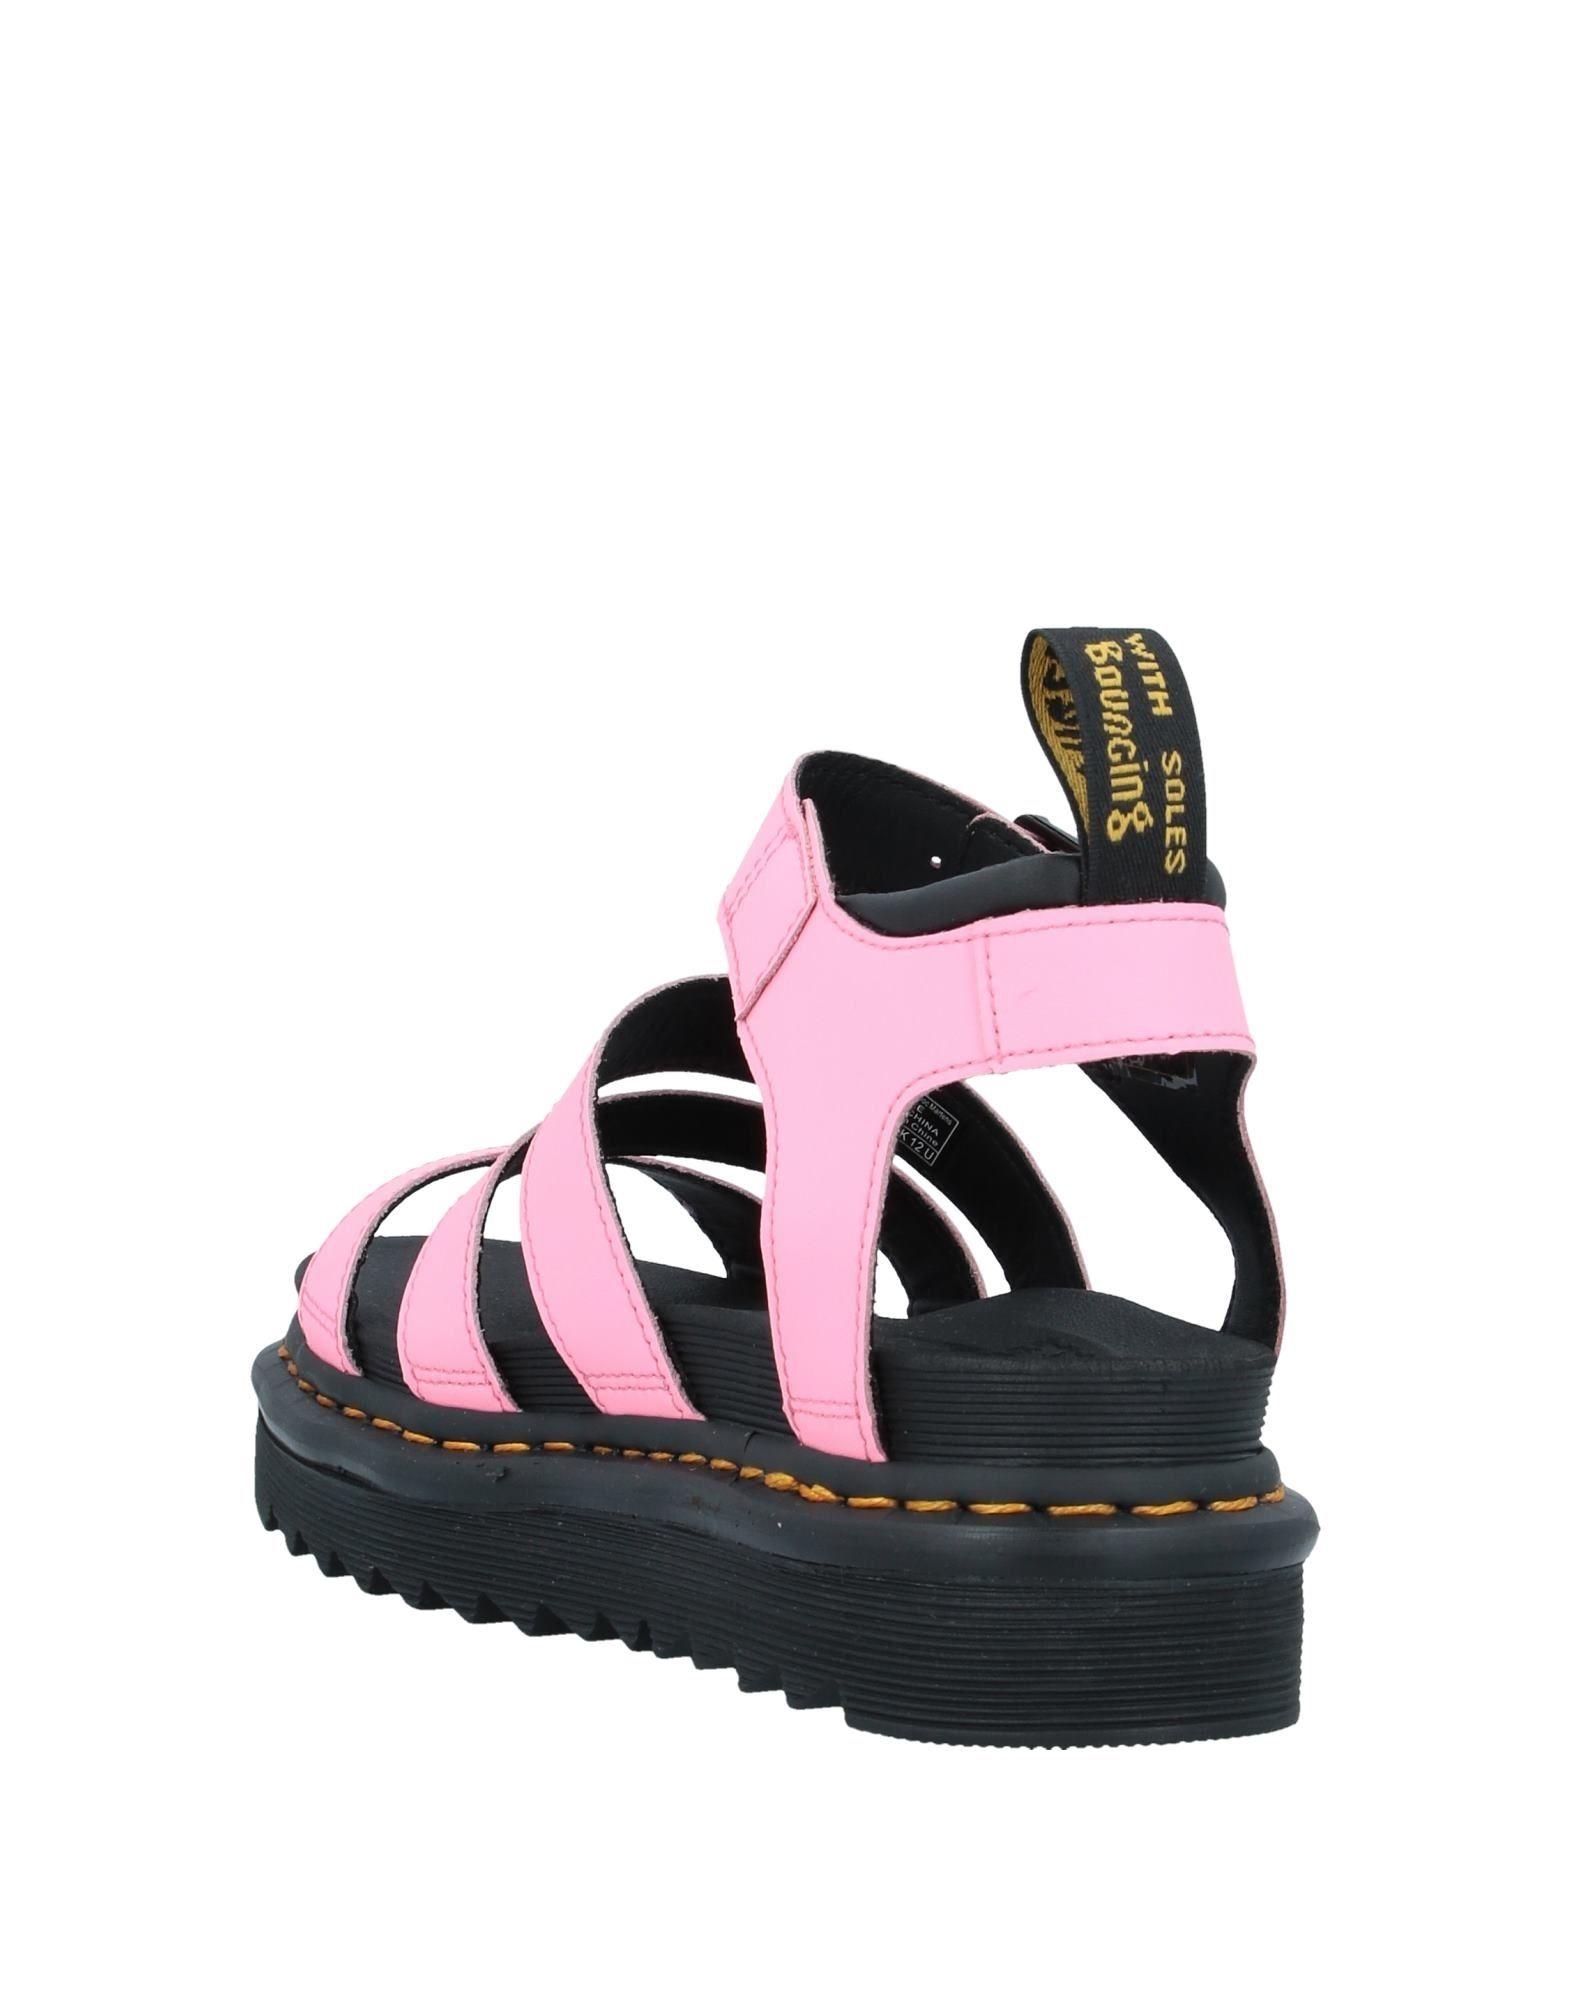 Dr. Martens Leather Blaire Sandals in Pink | Lyst